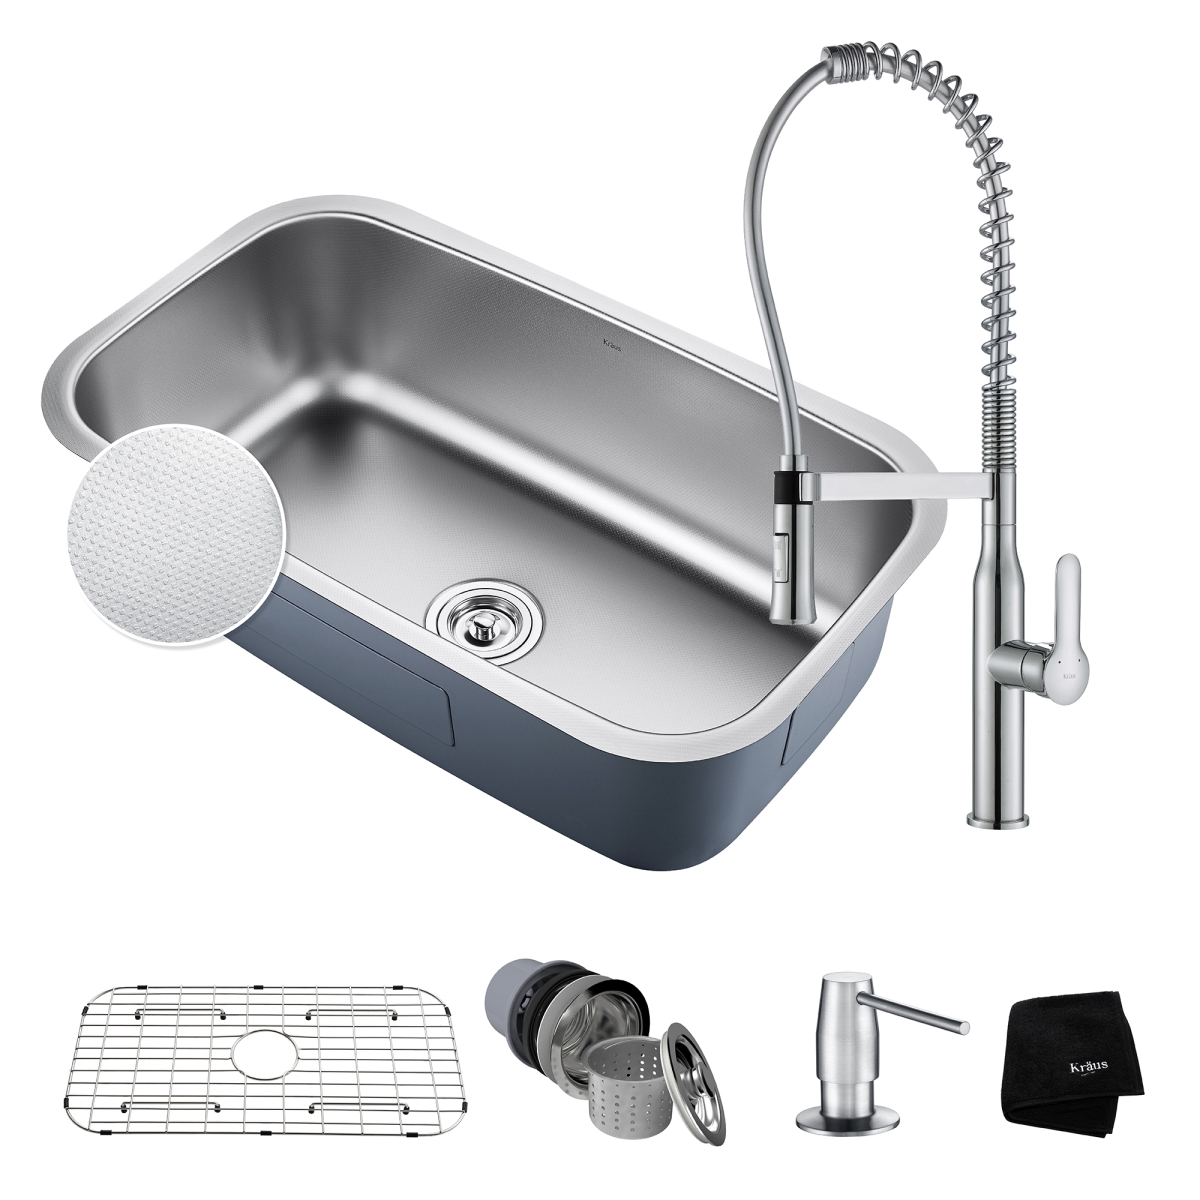 Kraus Kbu14e-1650-42ch 31.5 In. Combo With Outlast Microshield Undermount Single Bowl For Commercial Kitchen Sink & Nola, Chrome